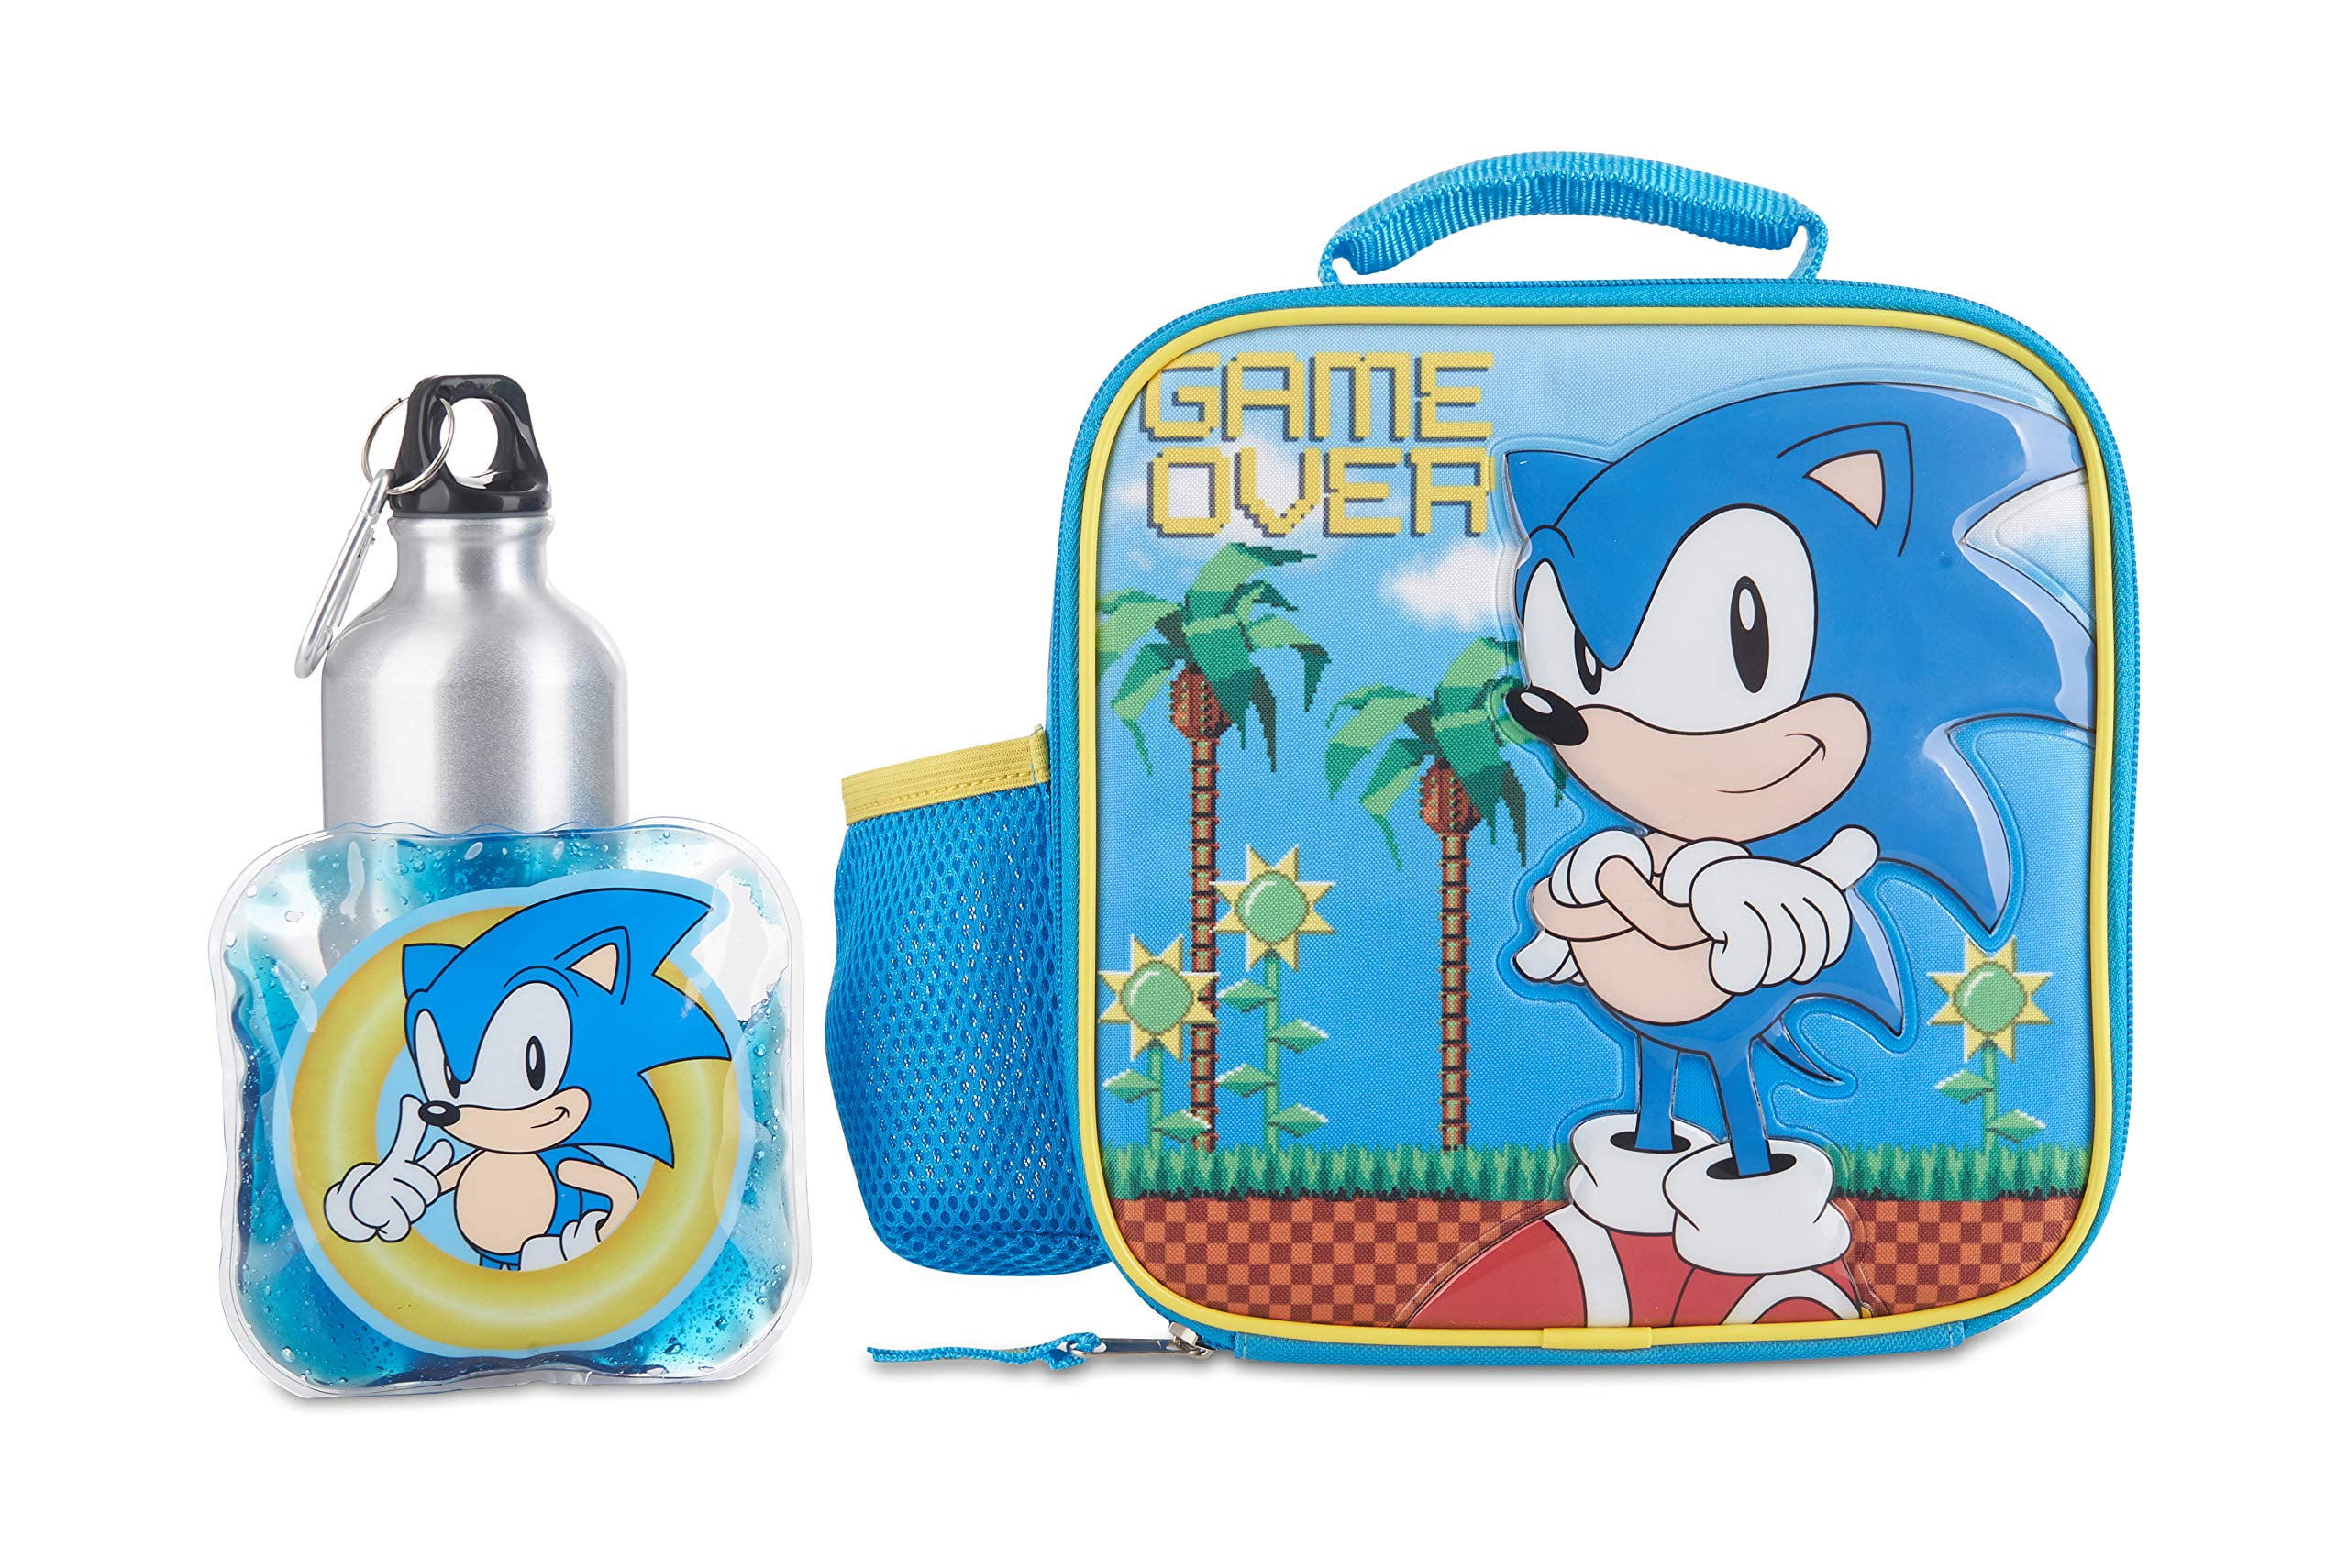 Sonic the Hedgehog Sonic Lunch Bag Shadow, Tails, Knuckles Insulated Travel  Bag